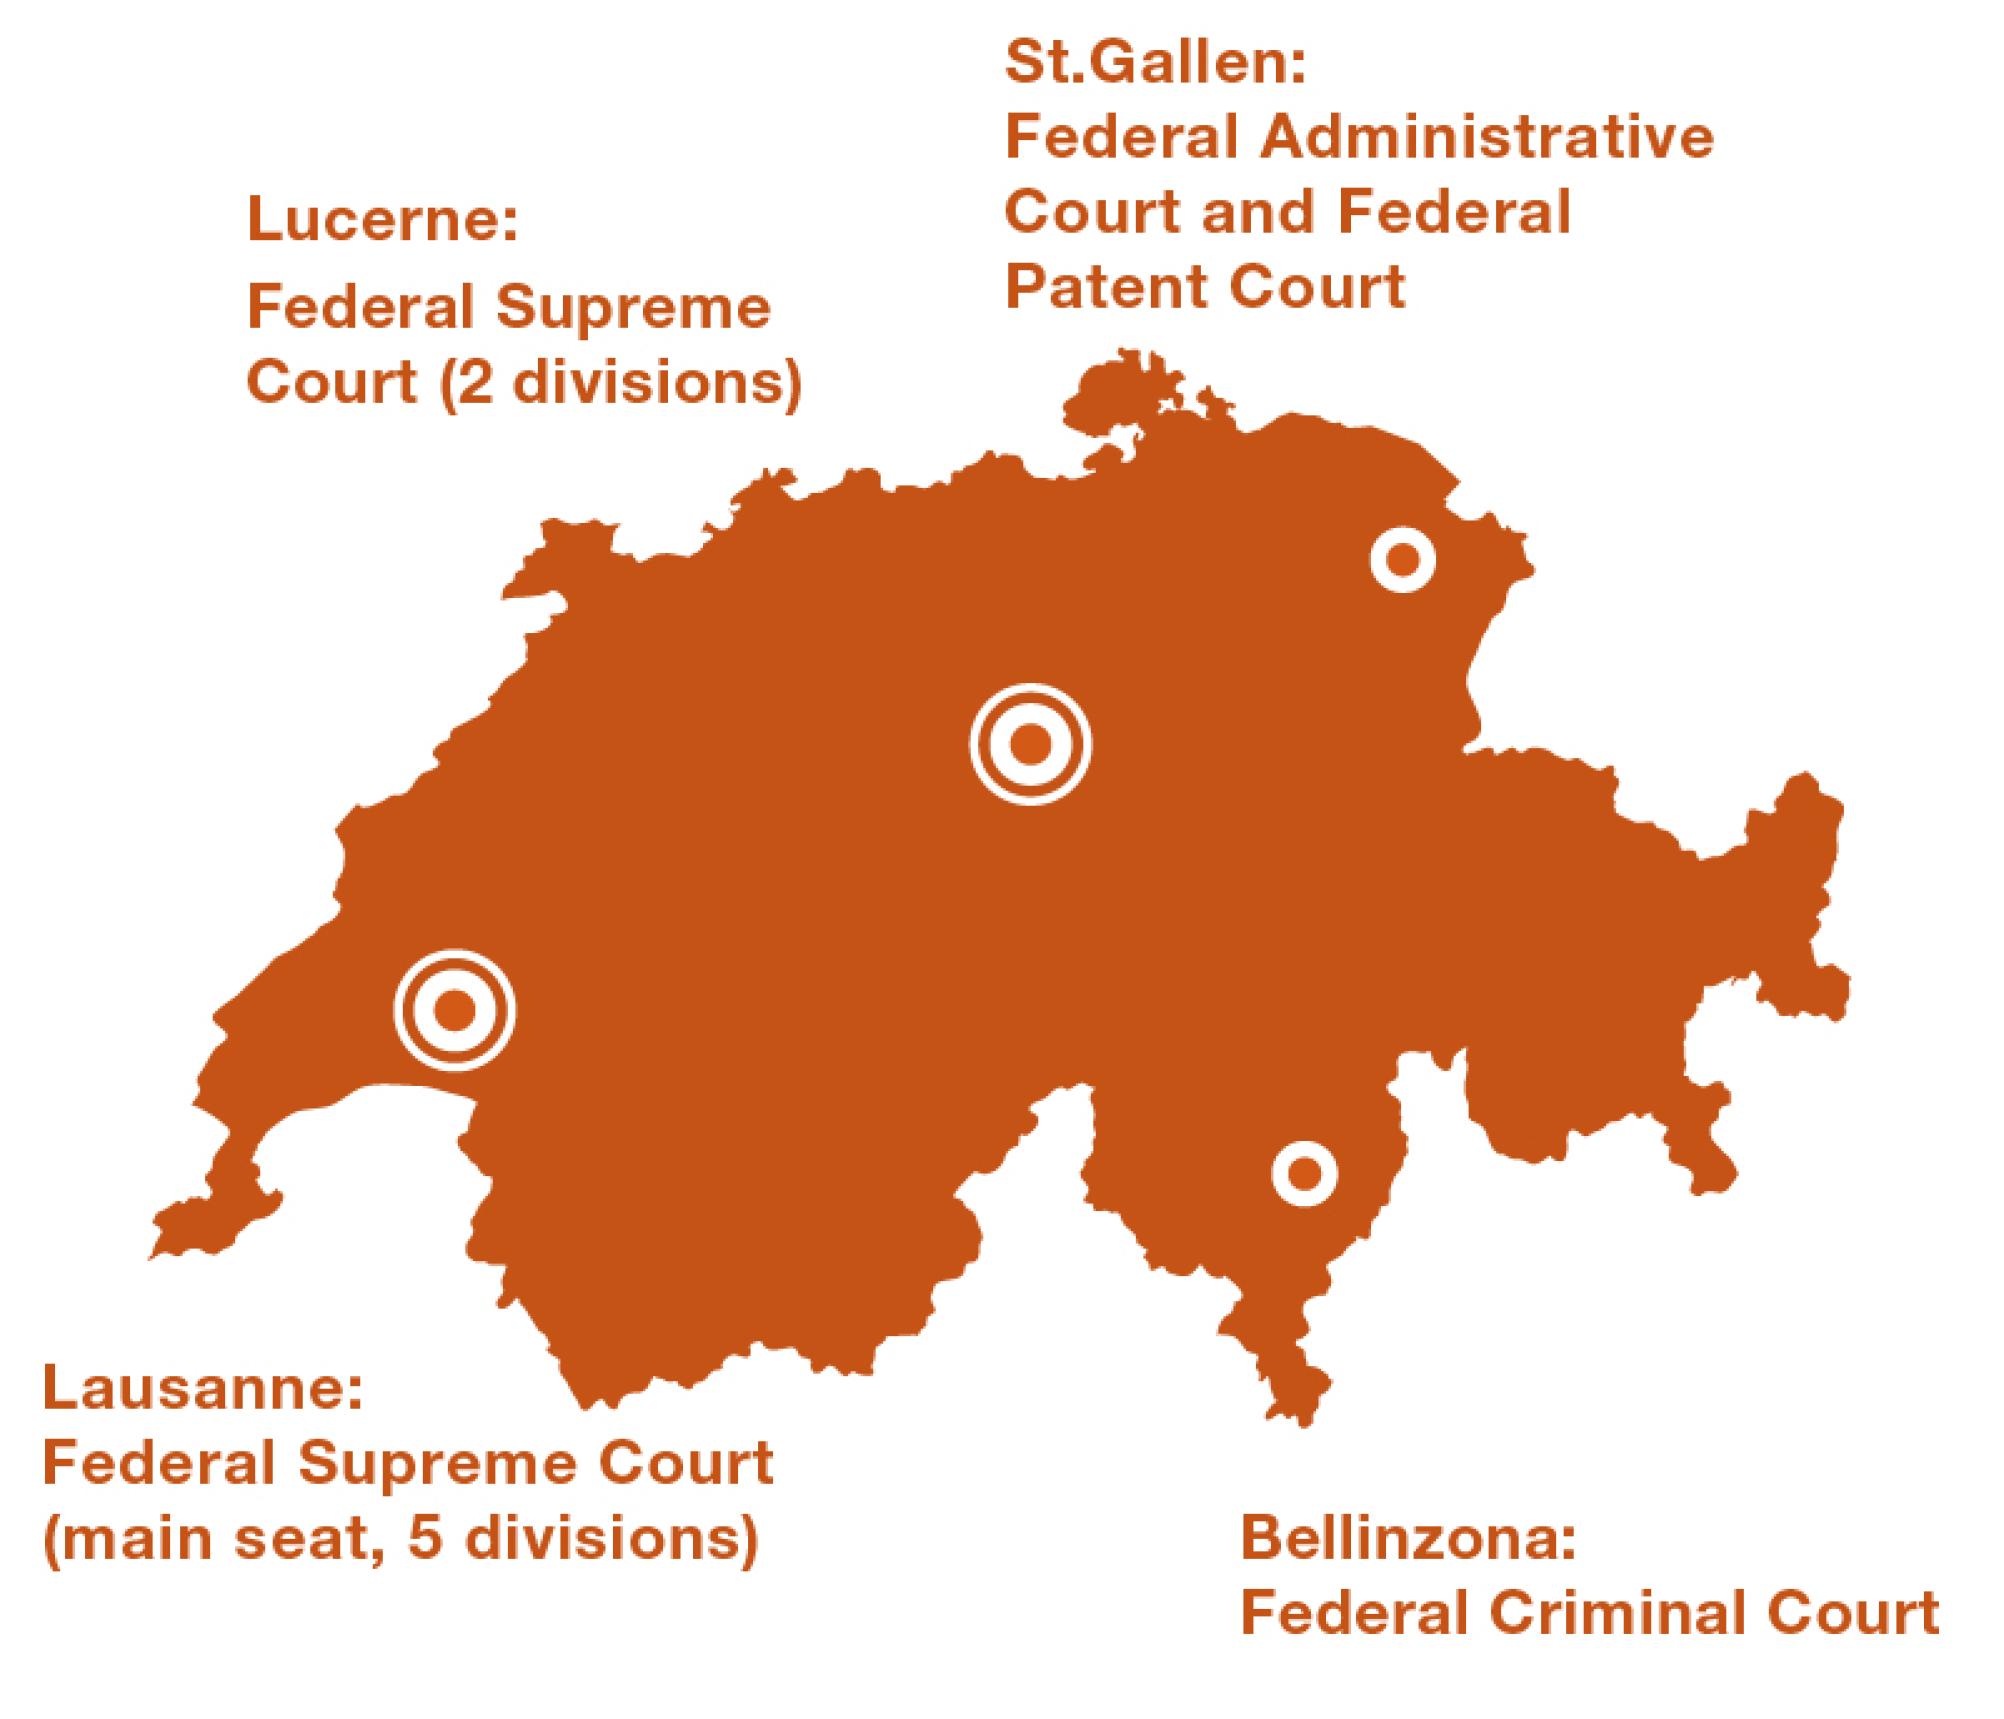 The federal courts are located at four sites. Lausanne: main seat of the Federal Supreme Court (5 divisions); Lucerne: Federal Supreme Court (2 divisions); St.Gallen: Federal Administrative Court and Federal Patent Court, and Bellinzona: Federal Criminal Court.